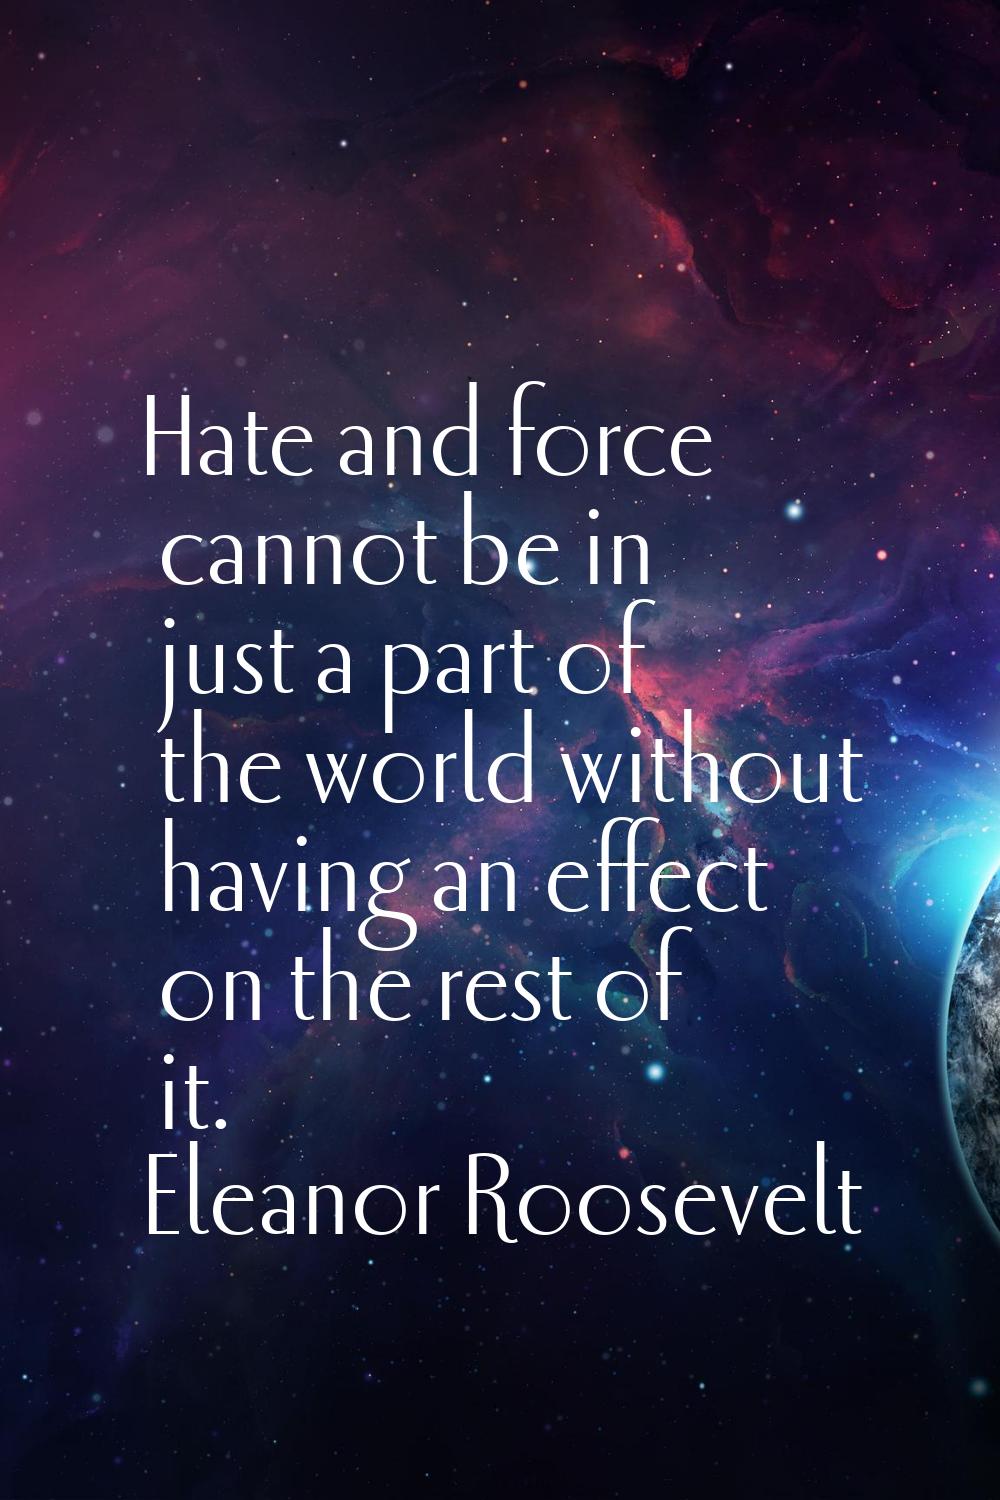 Hate and force cannot be in just a part of the world without having an effect on the rest of it.